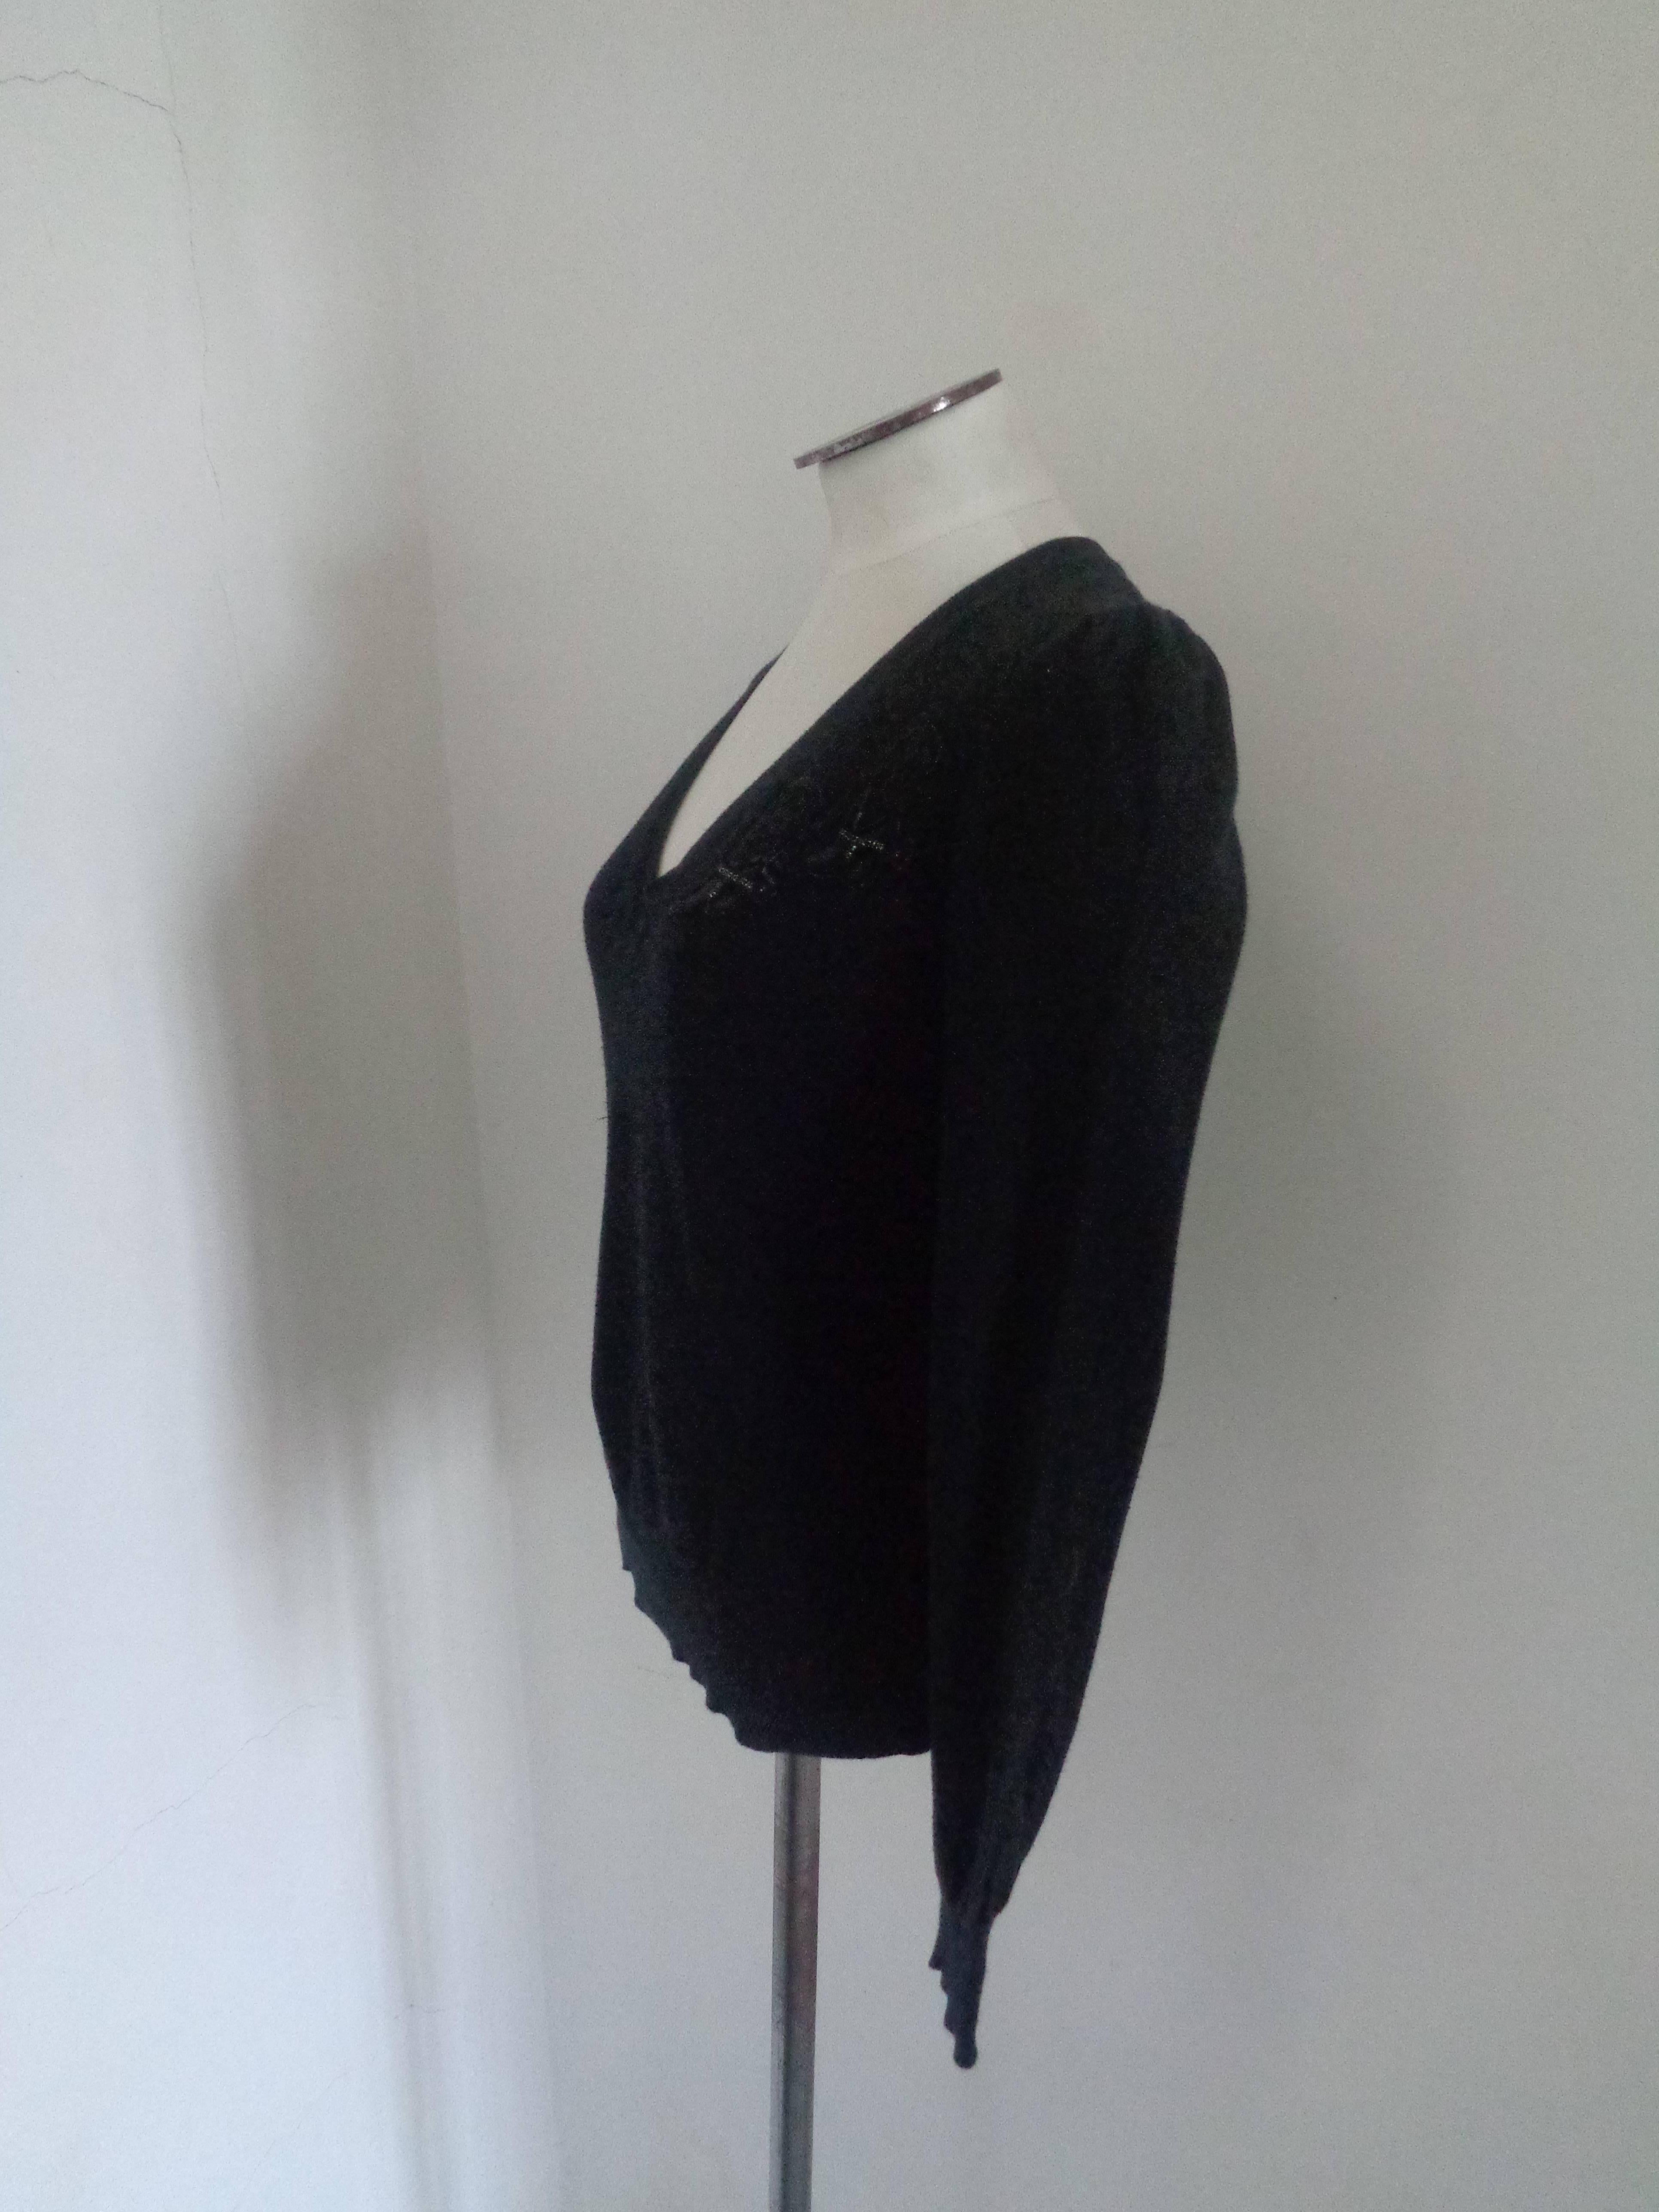 Moschino Black Boots Cotton Shirt In Excellent Condition For Sale In Capri, IT